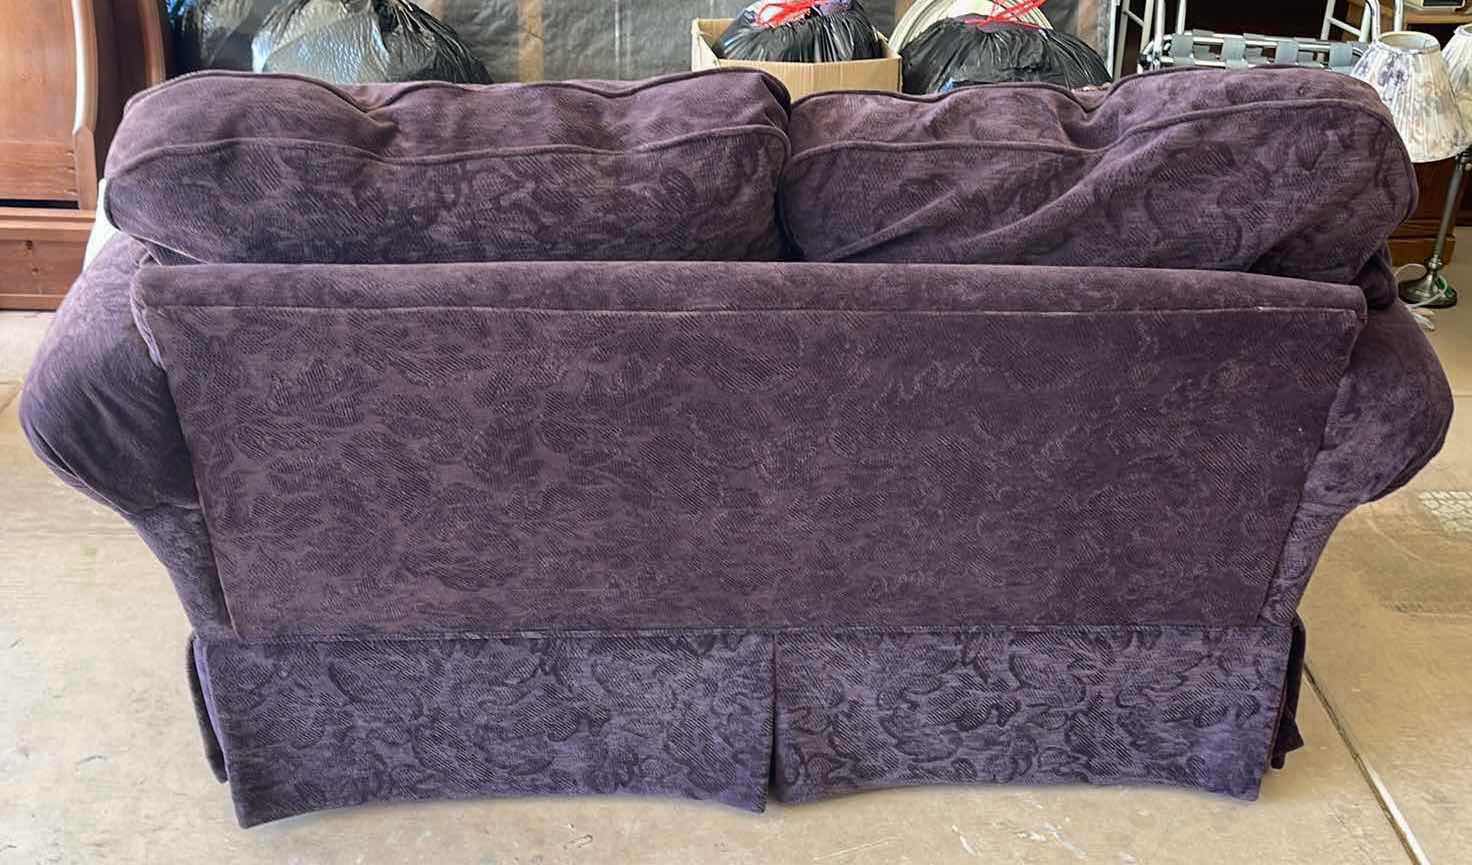 Photo 4 of LOVE SEAT W DECOR PILLOWS PURPLE LEAF PATTERN UPHOLSTERY 40” X 64” H34”